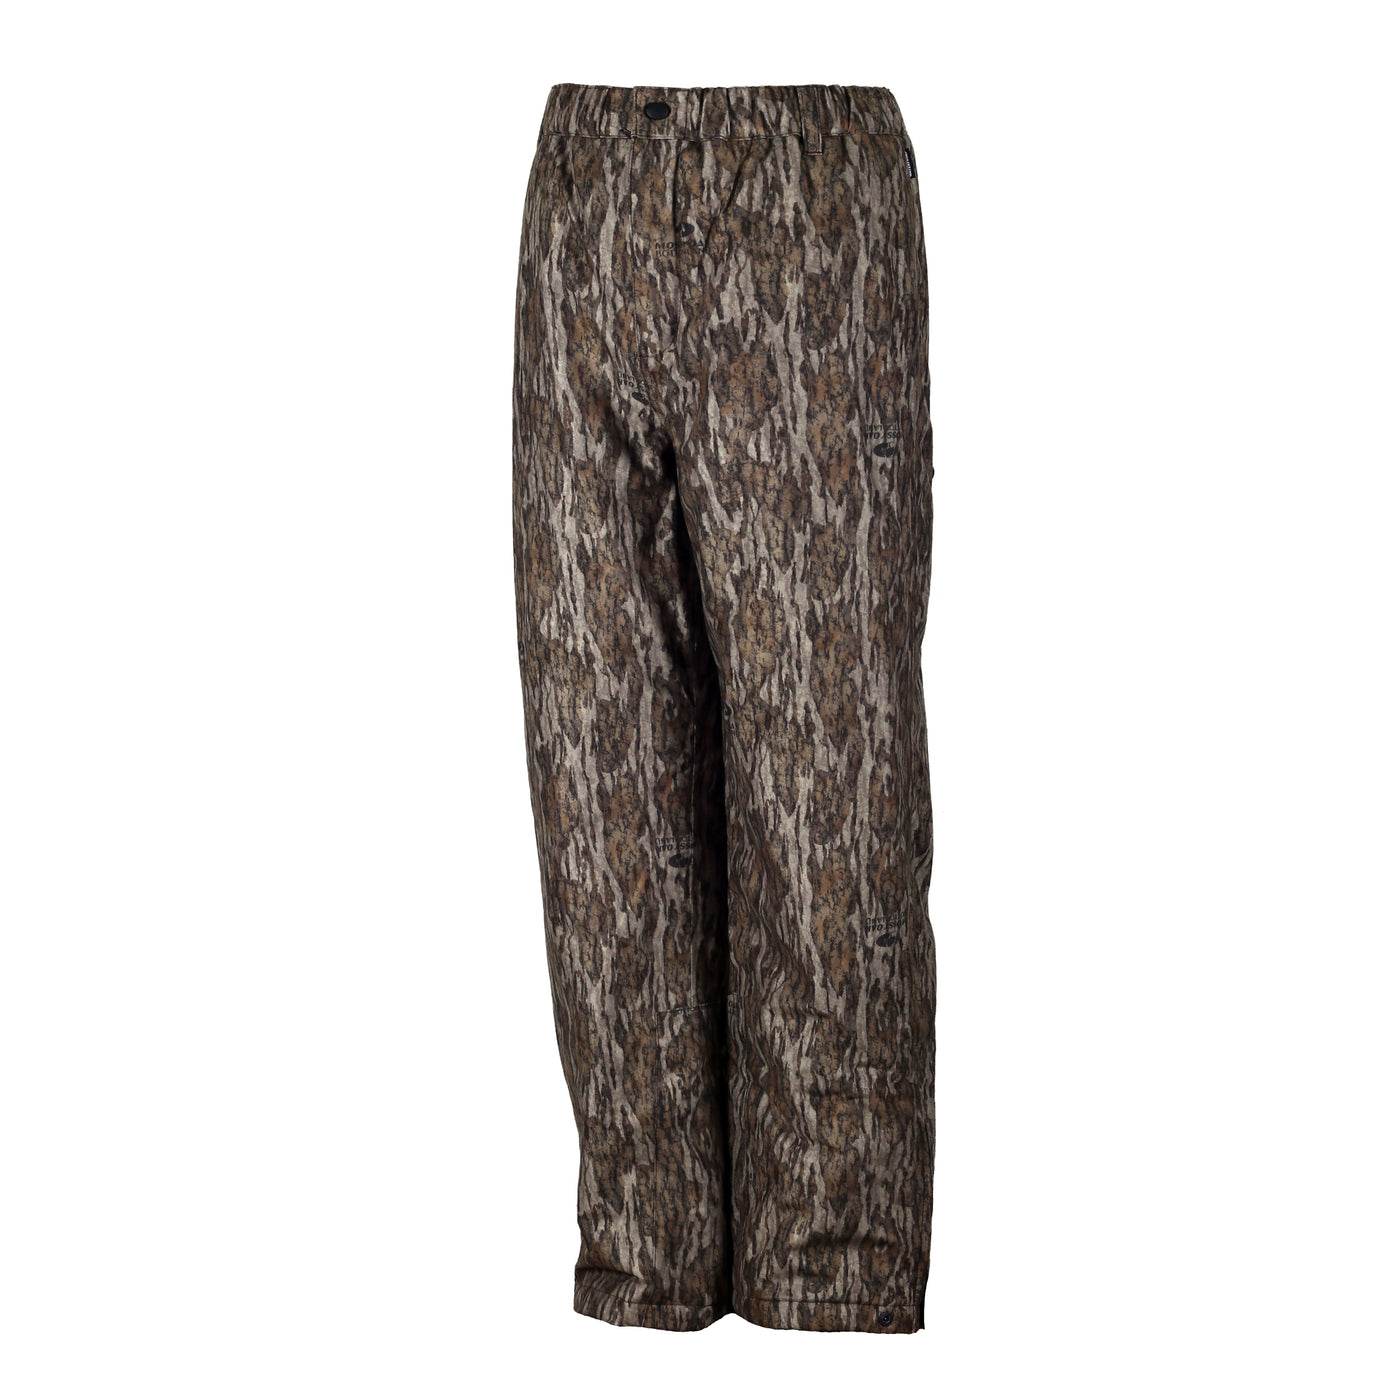 Gamehide Tundra Pant-HUNTING/OUTDOORS-Bottomland-M-Kevin's Fine Outdoor Gear & Apparel